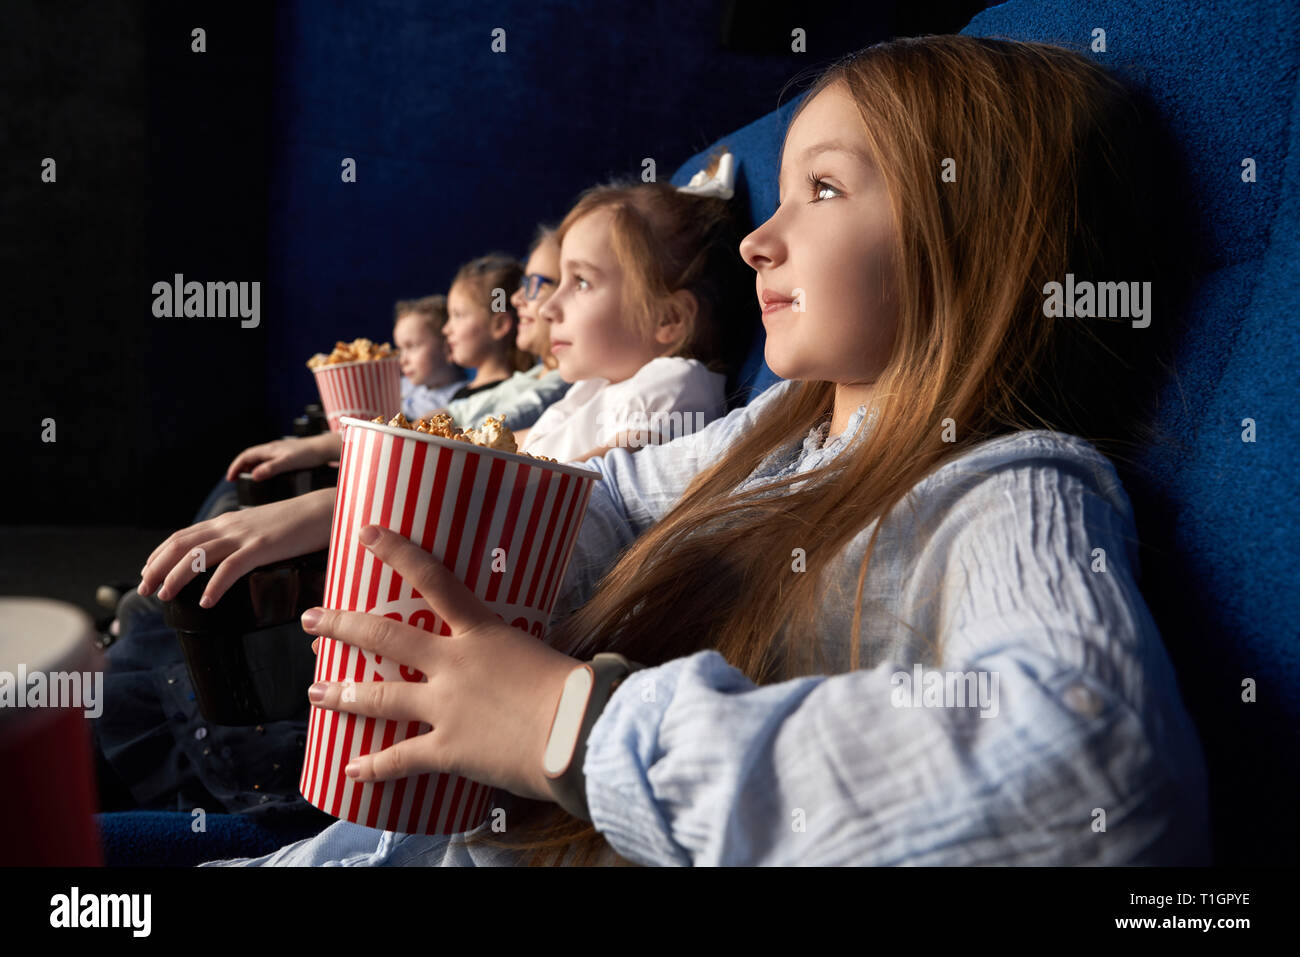 Pretty, little girl holding popcorn bucket, sitting with friends in cinema, in comfortable chairs. Children watching cartoon or movie. Leisure, entertainment. Stock Photo